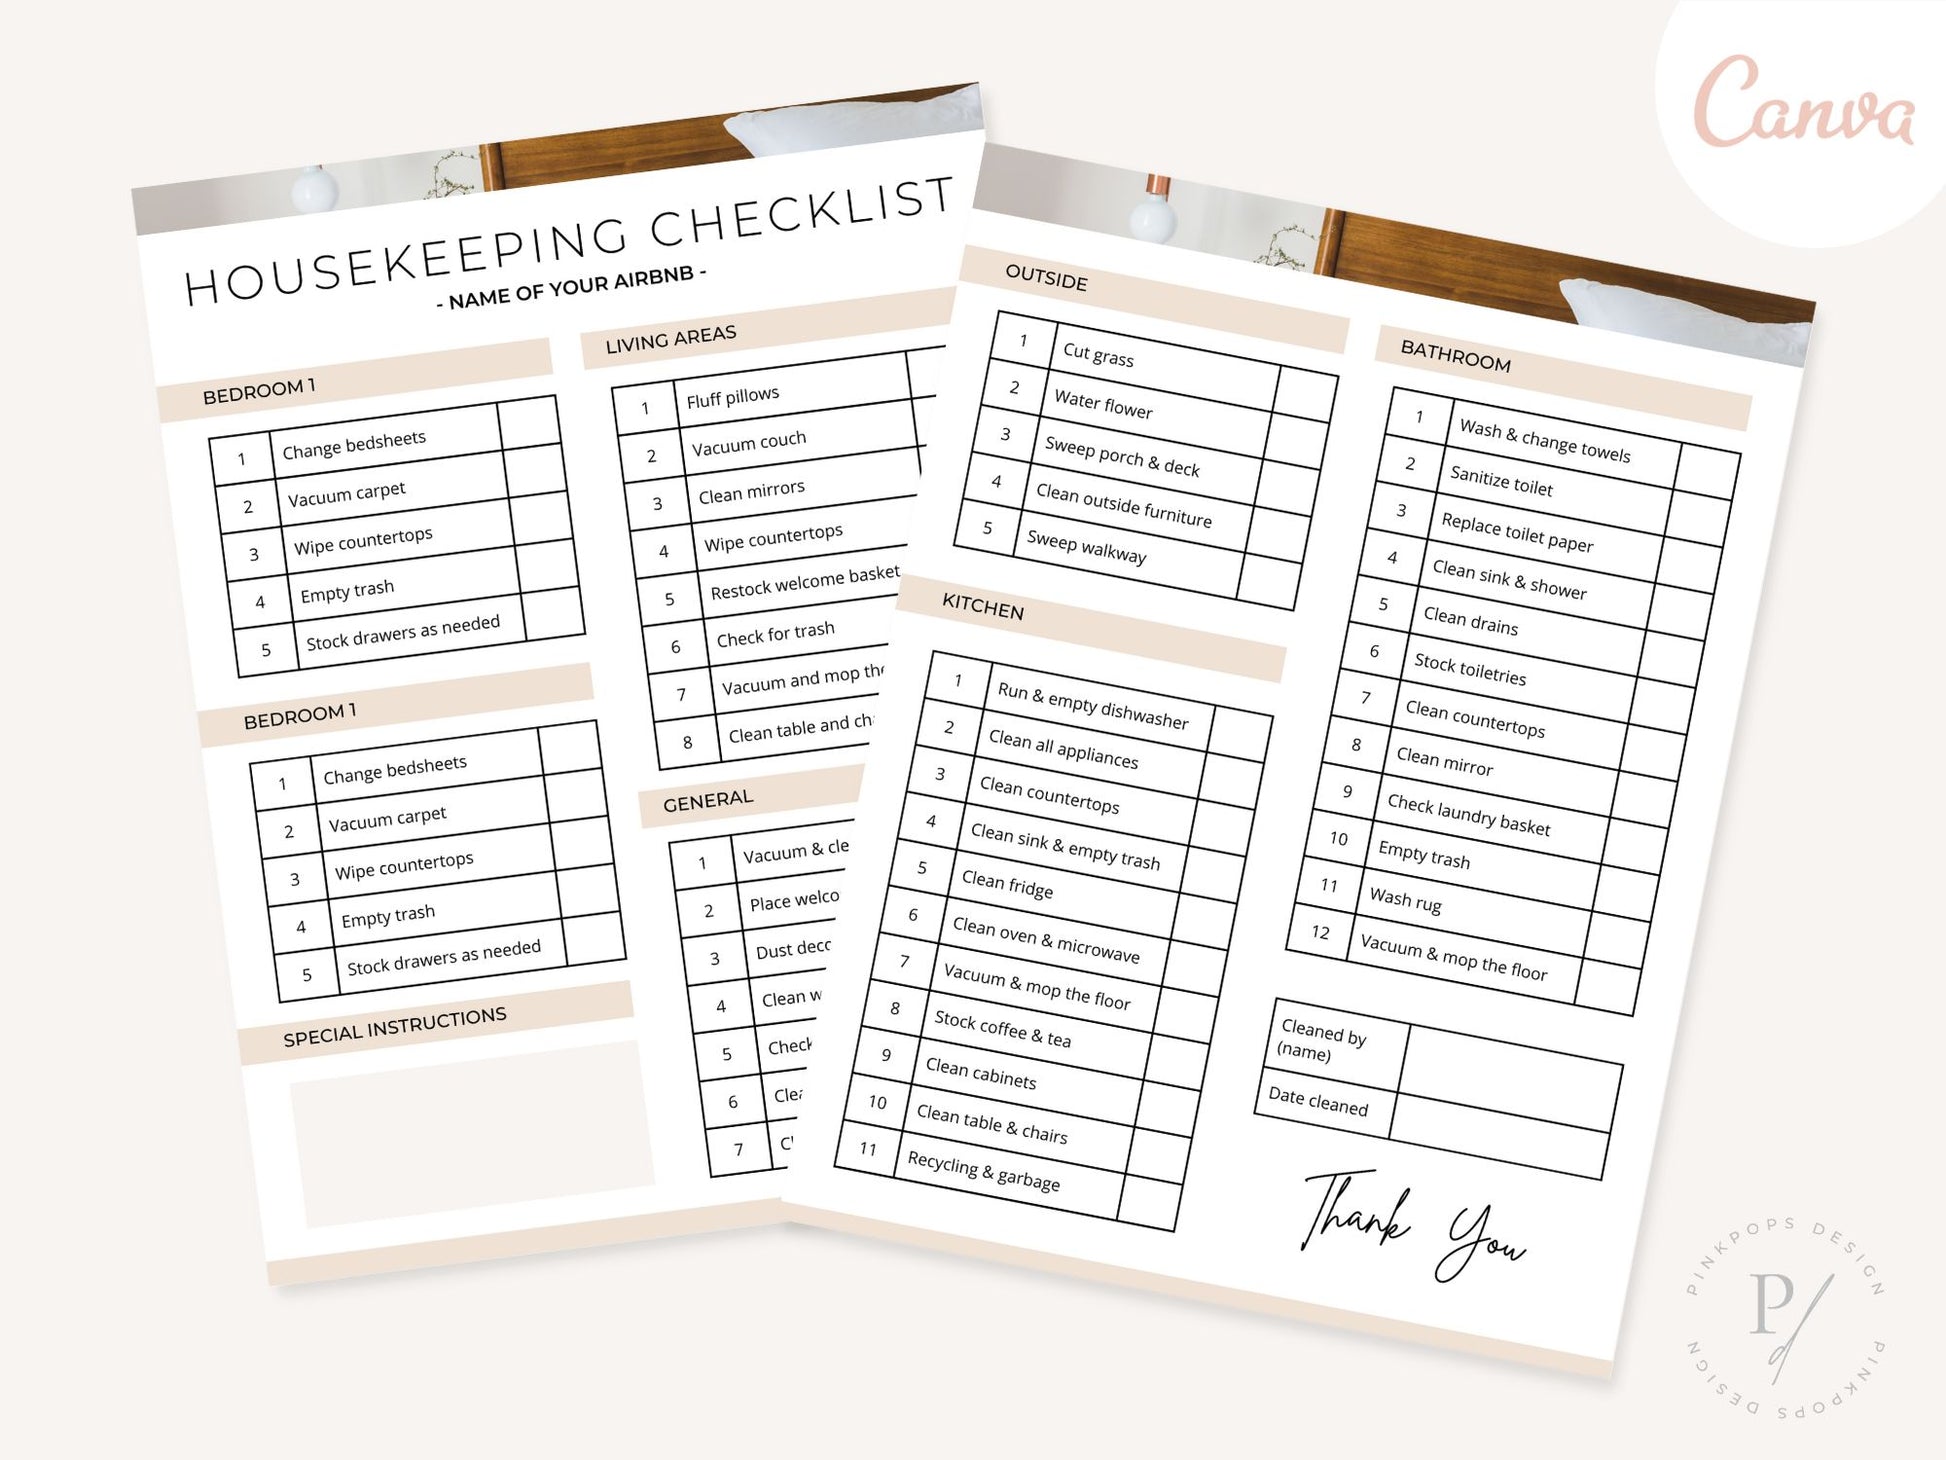 Airbnb Housekeeping Checklist - Comprehensive and editable template for maintaining cleanliness in your vacation rental property.